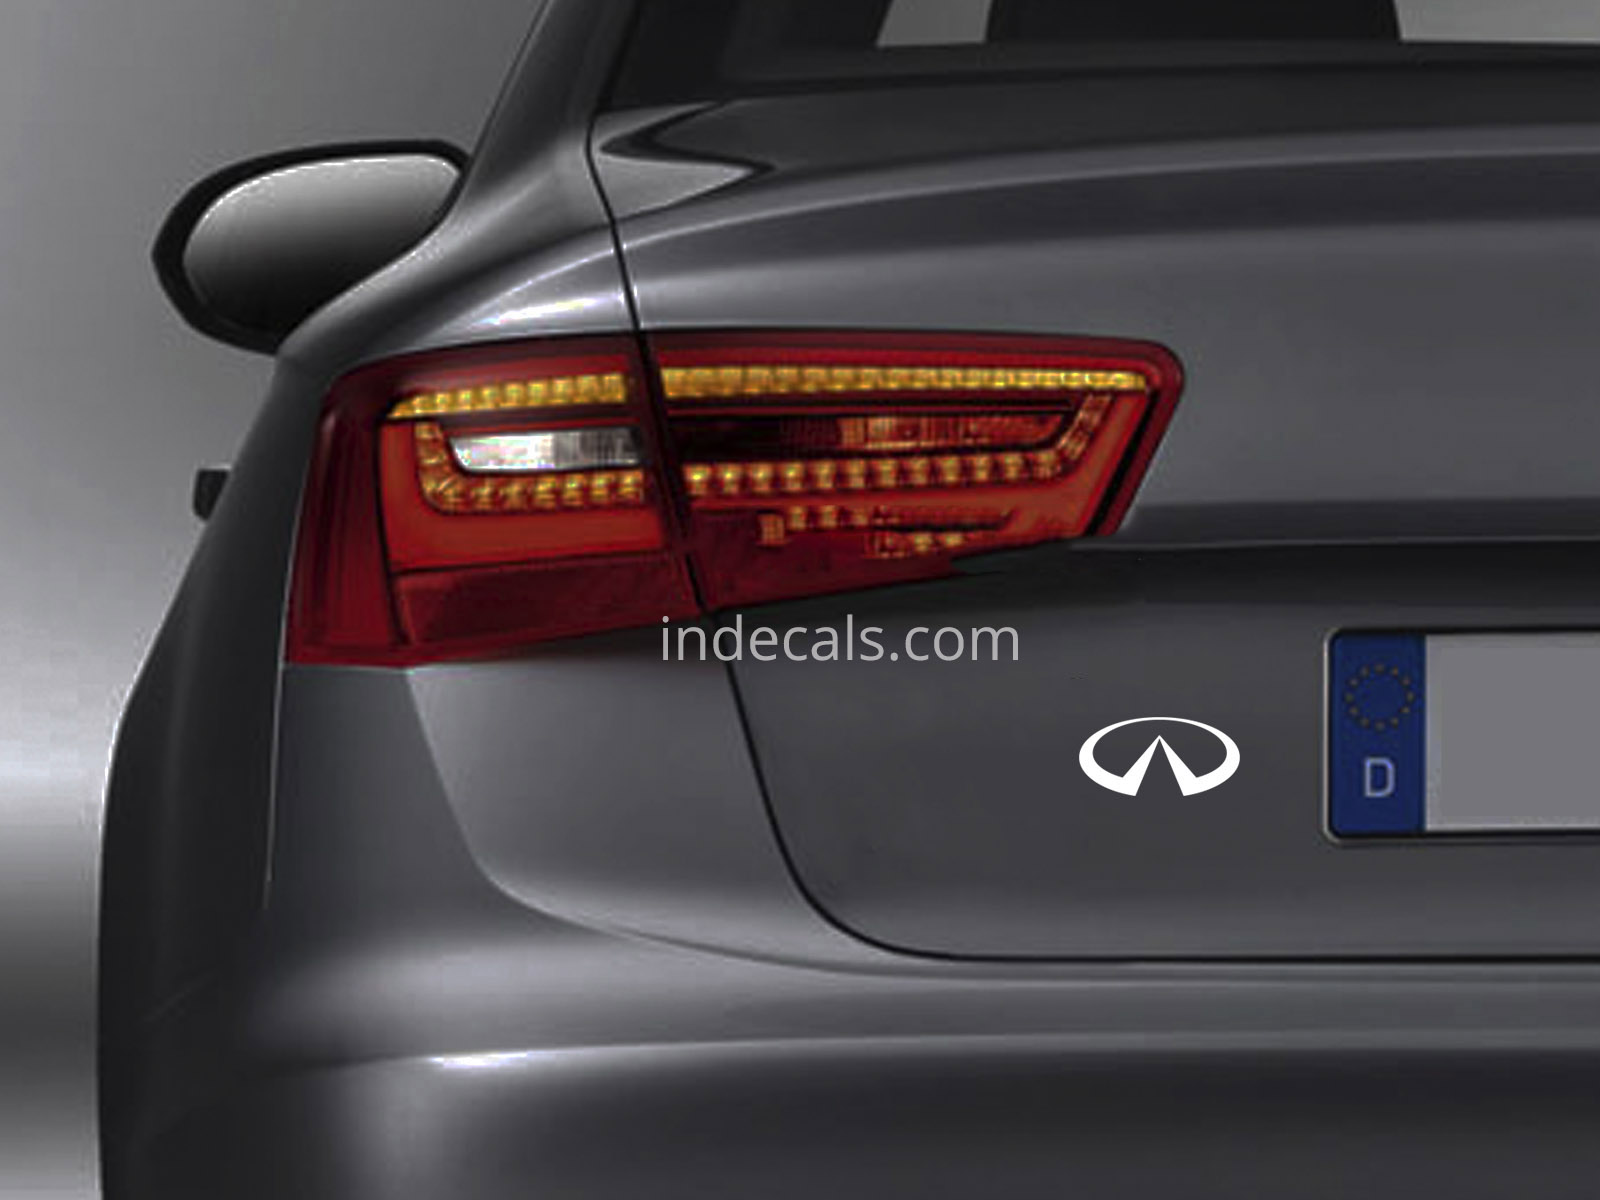 3 x Infiniti Stickers for Trunk - White